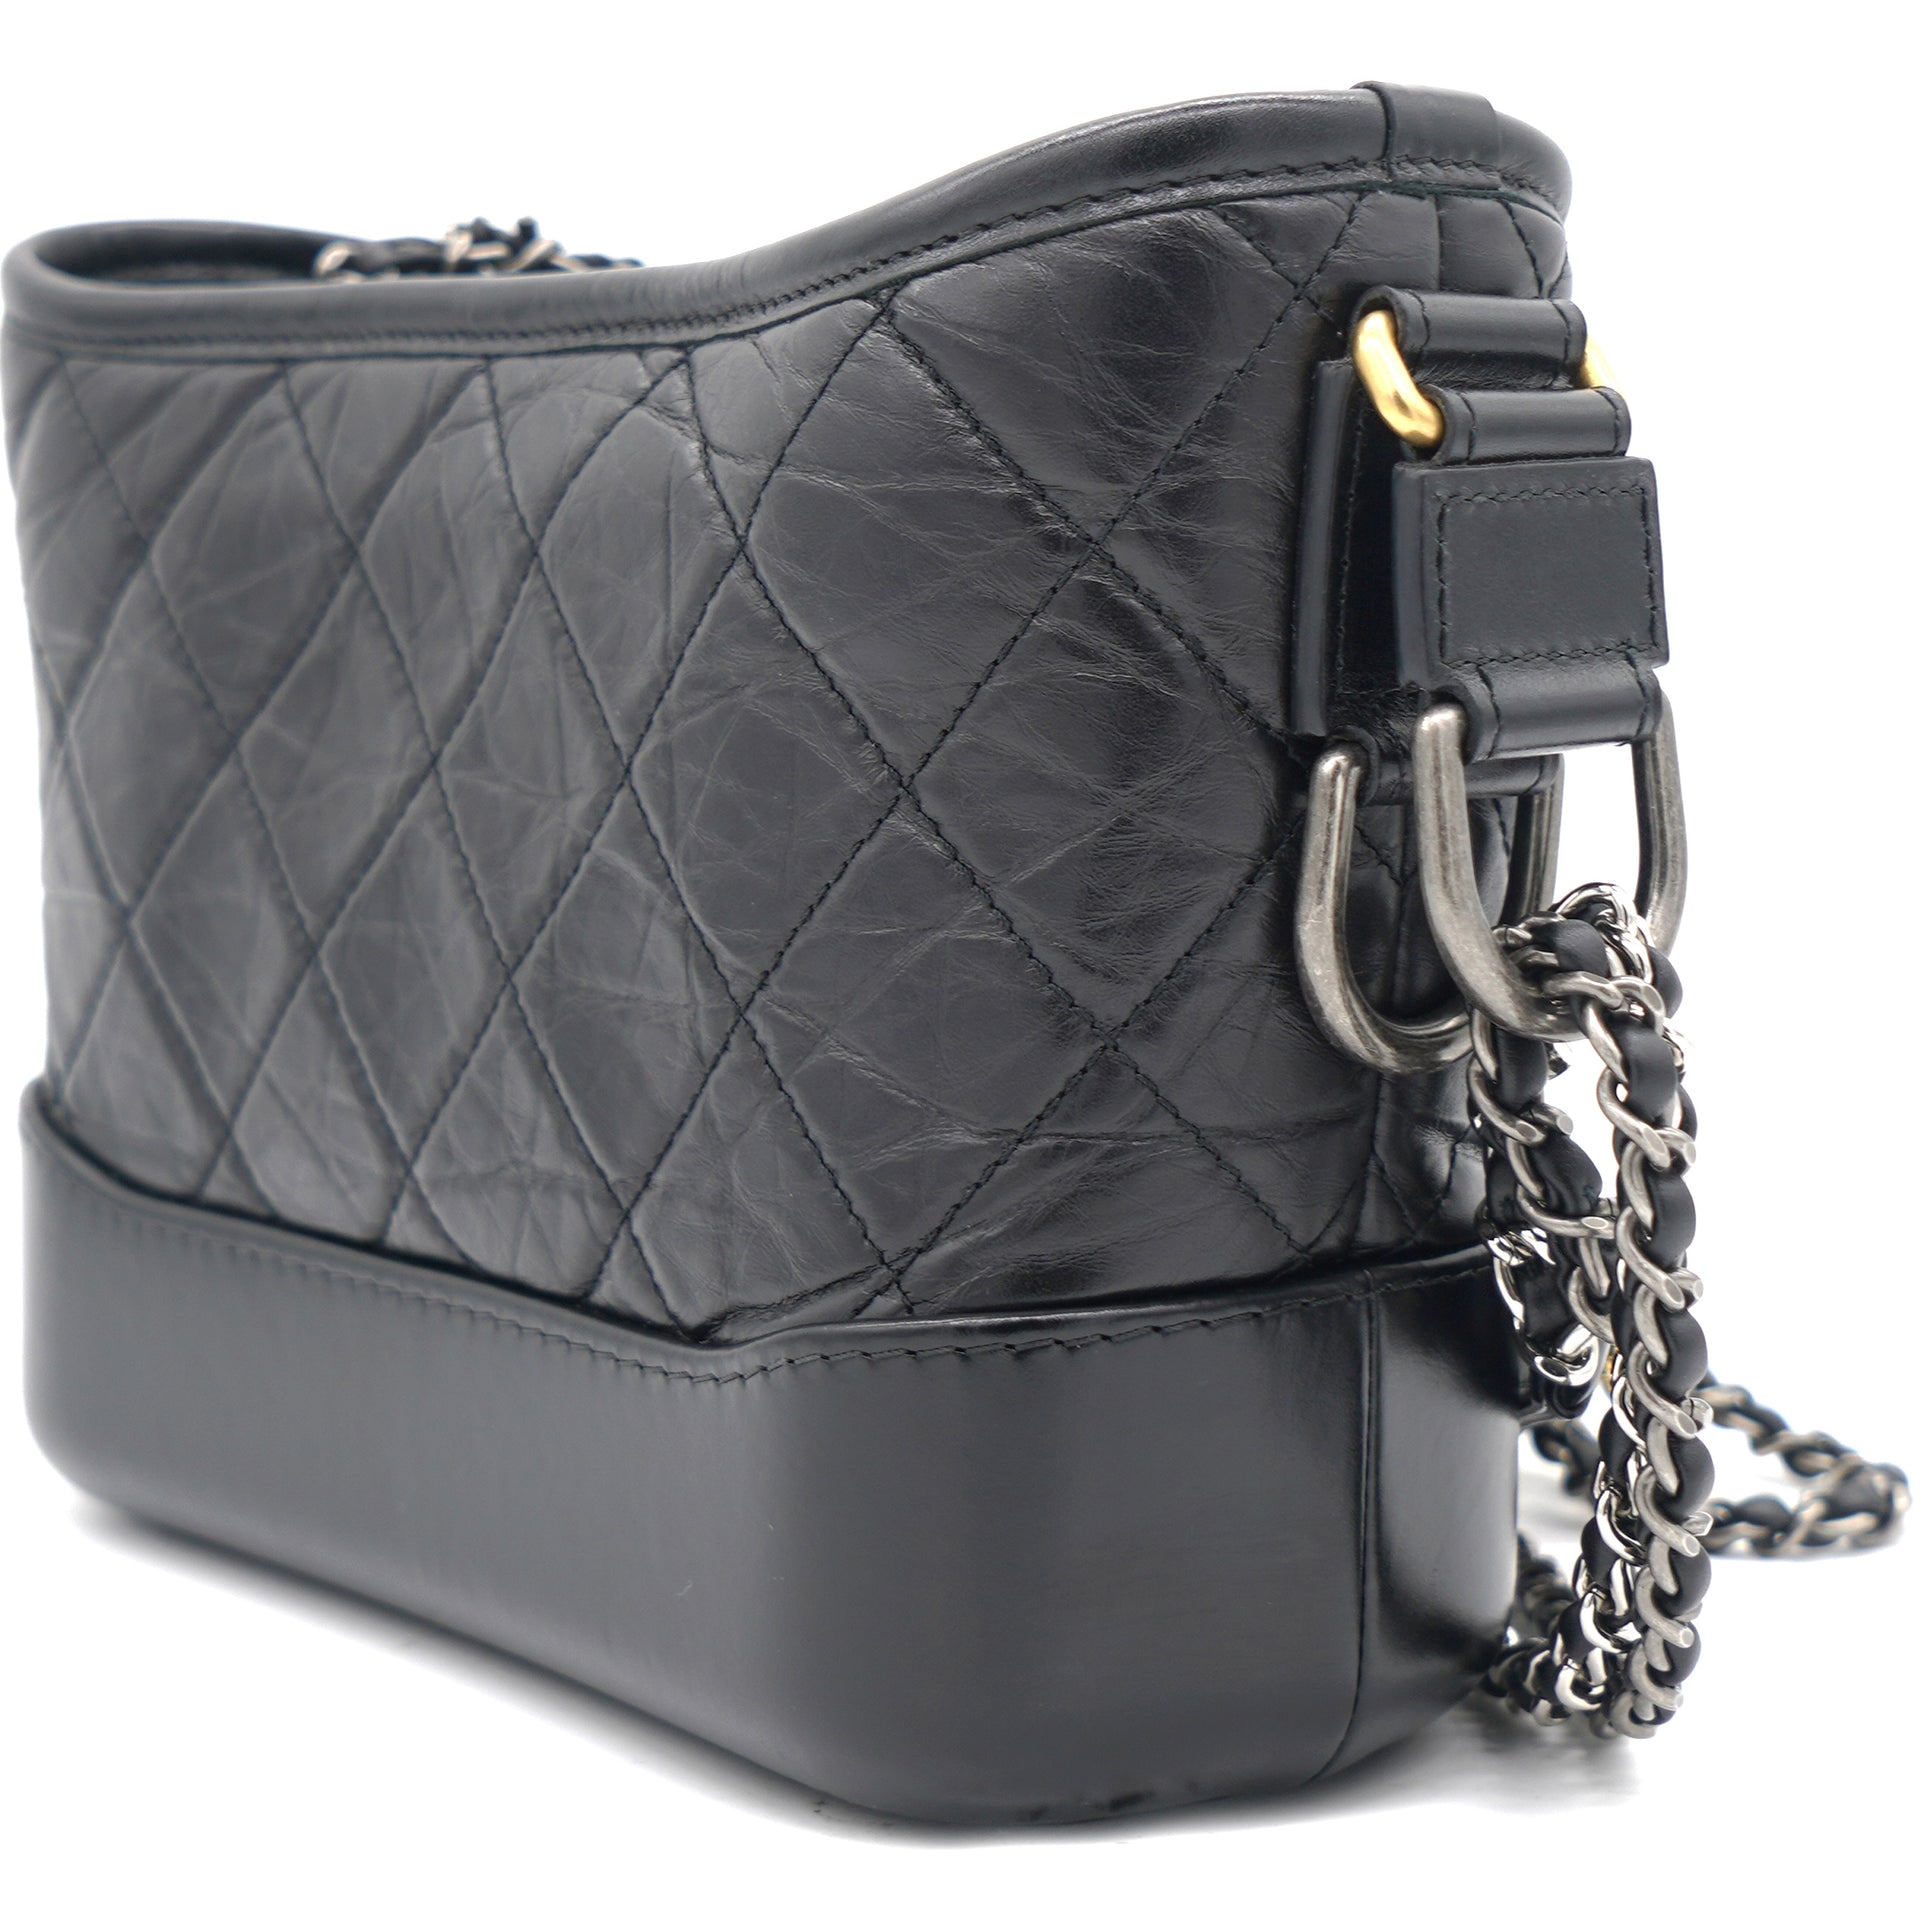 Chanel Calfskin Quilted Small Gabrielle Hobo Black White – STYLISHTOP